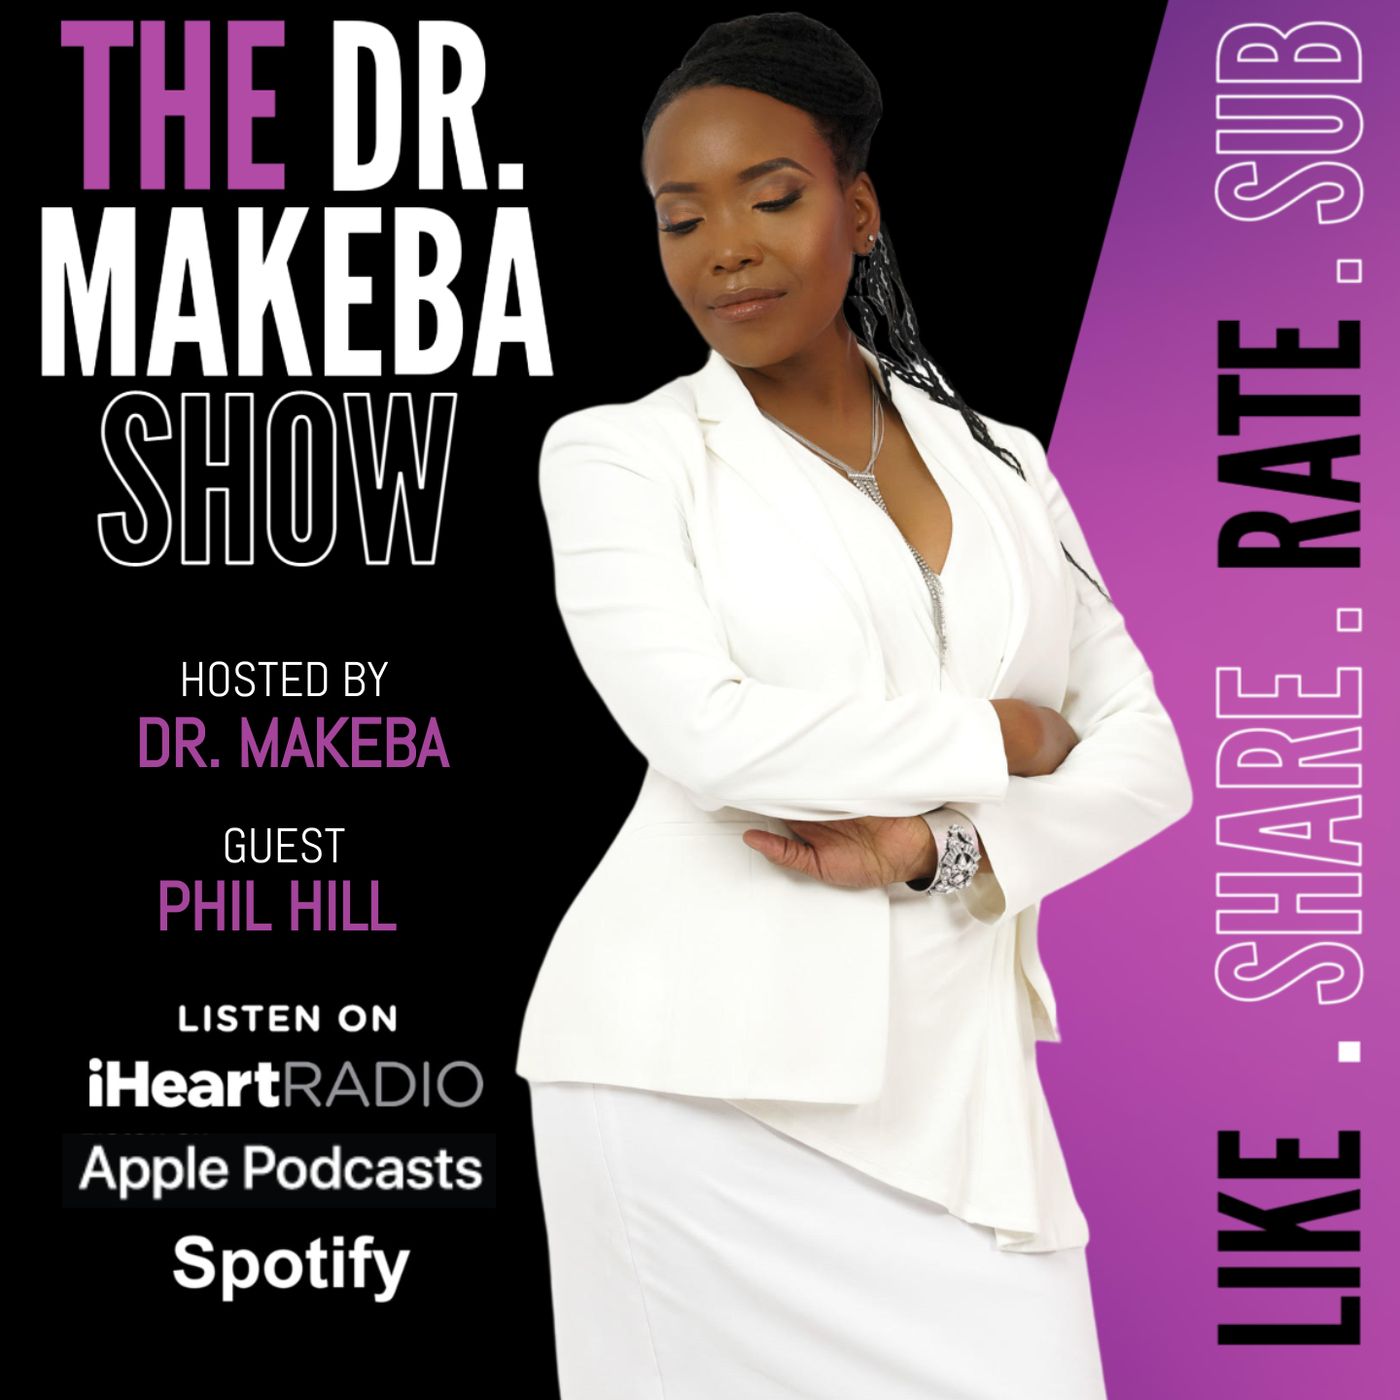 THE DR. MAKEBA SHOW, HOSTED BY DR. MAKEBA MORING (GUEST: PHIL HILL)